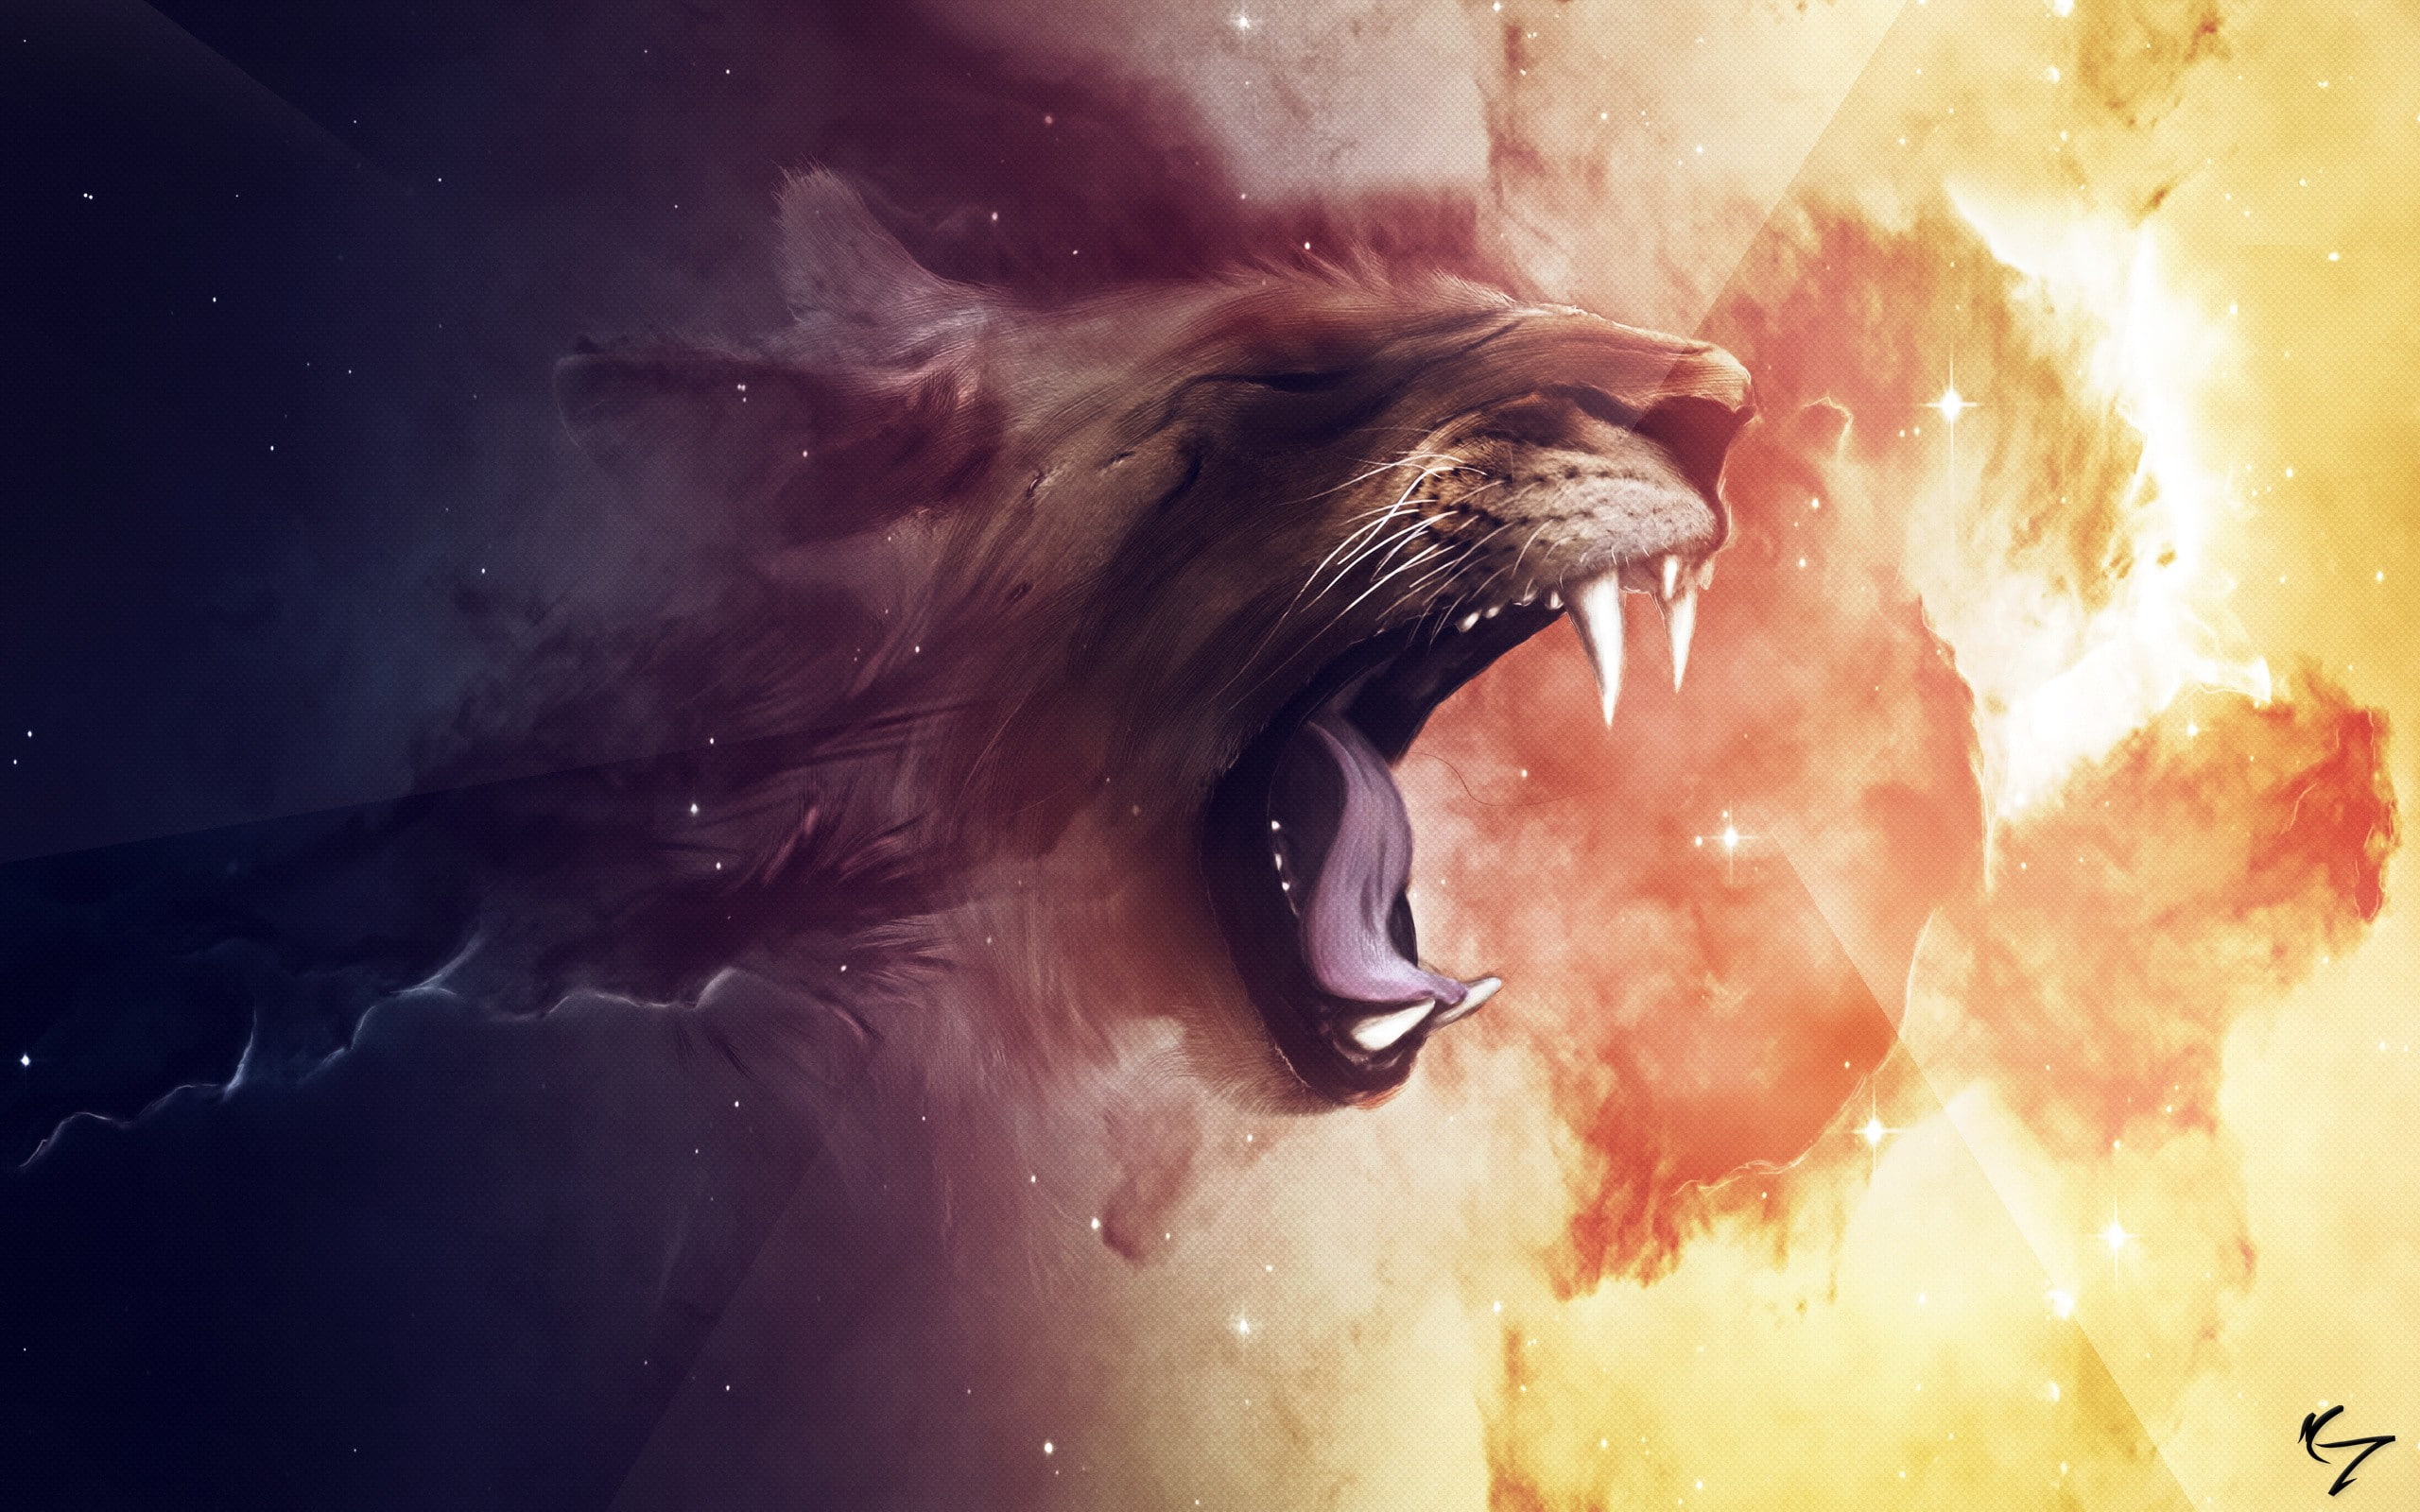 artwork, fantasy art, abstract, space, lion, clouds, stars